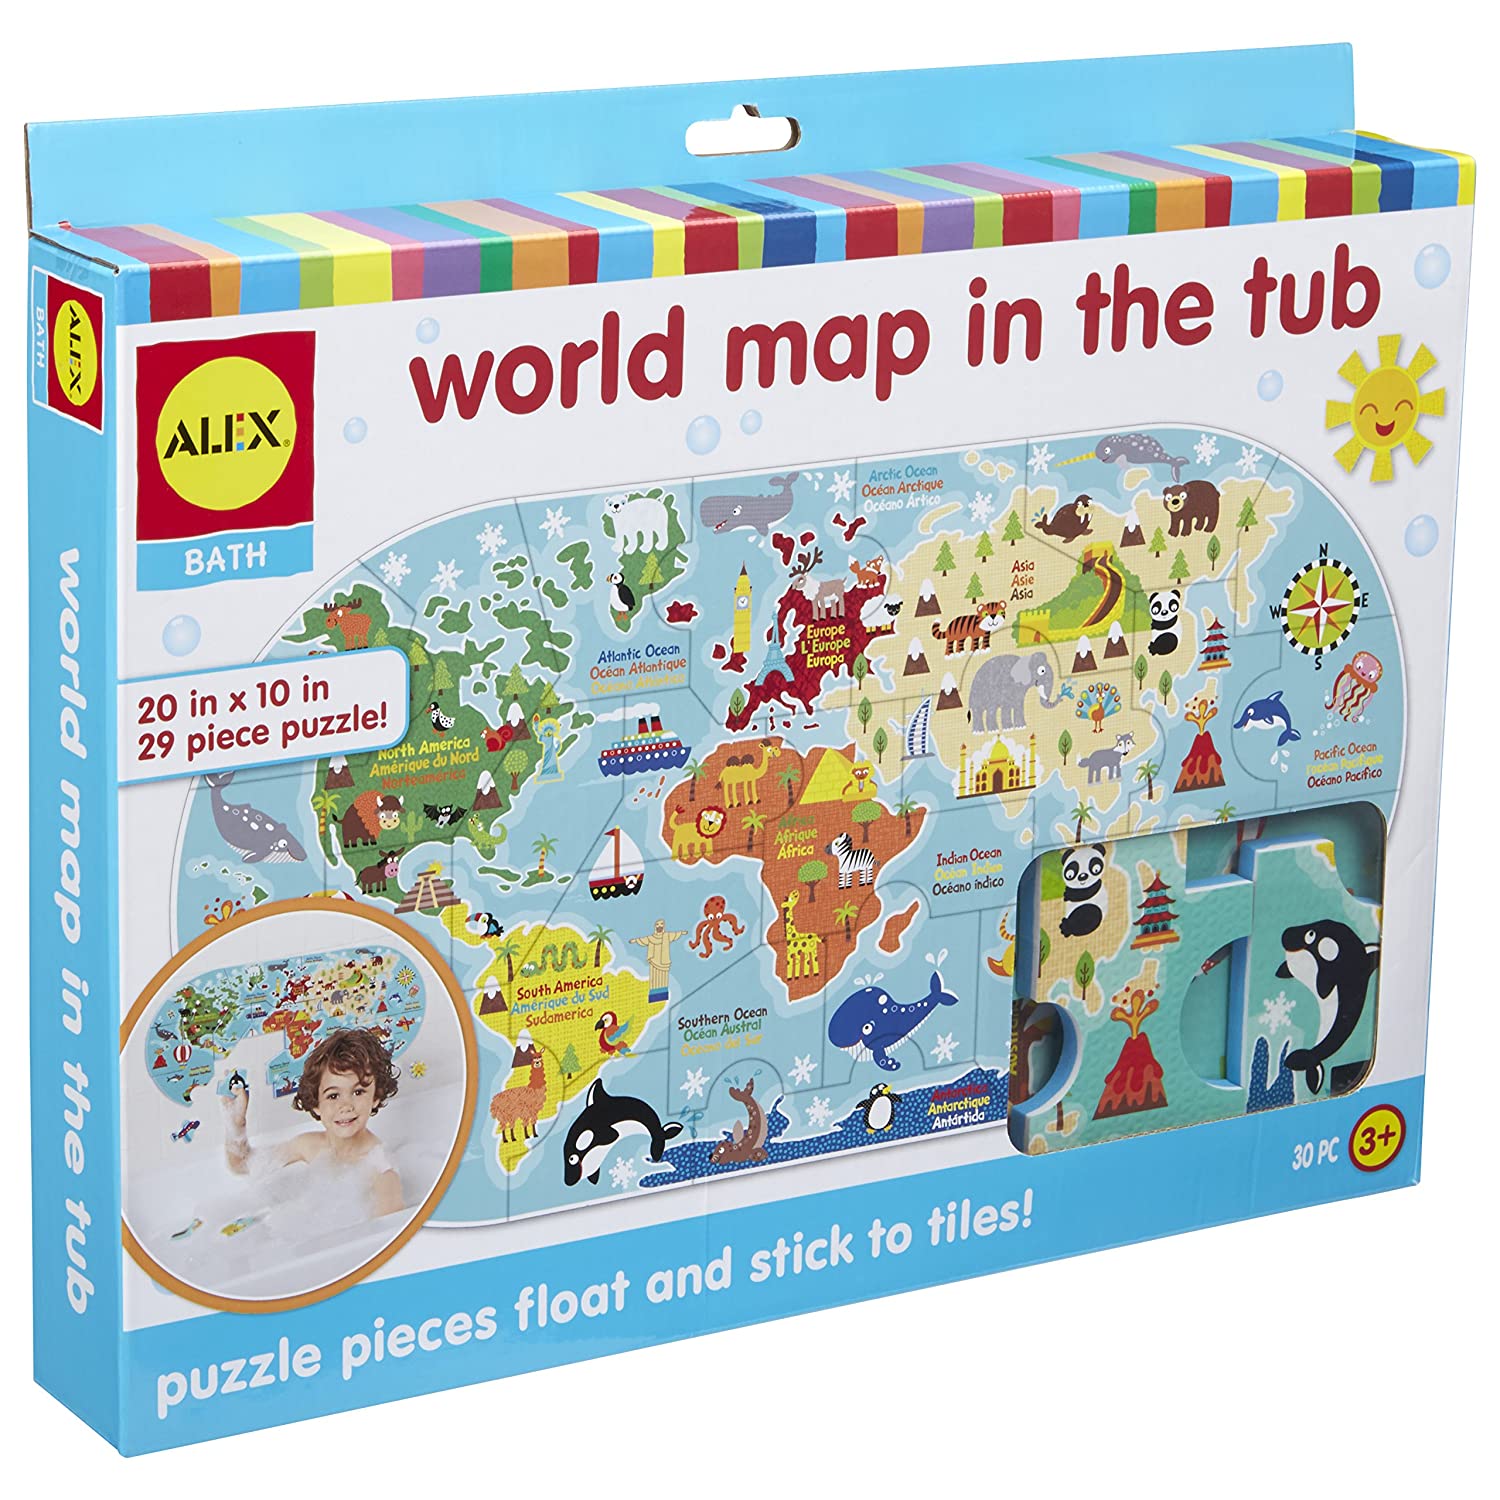 10 Best World Map for Kids 2022 - Buying Guide & Reviews 7